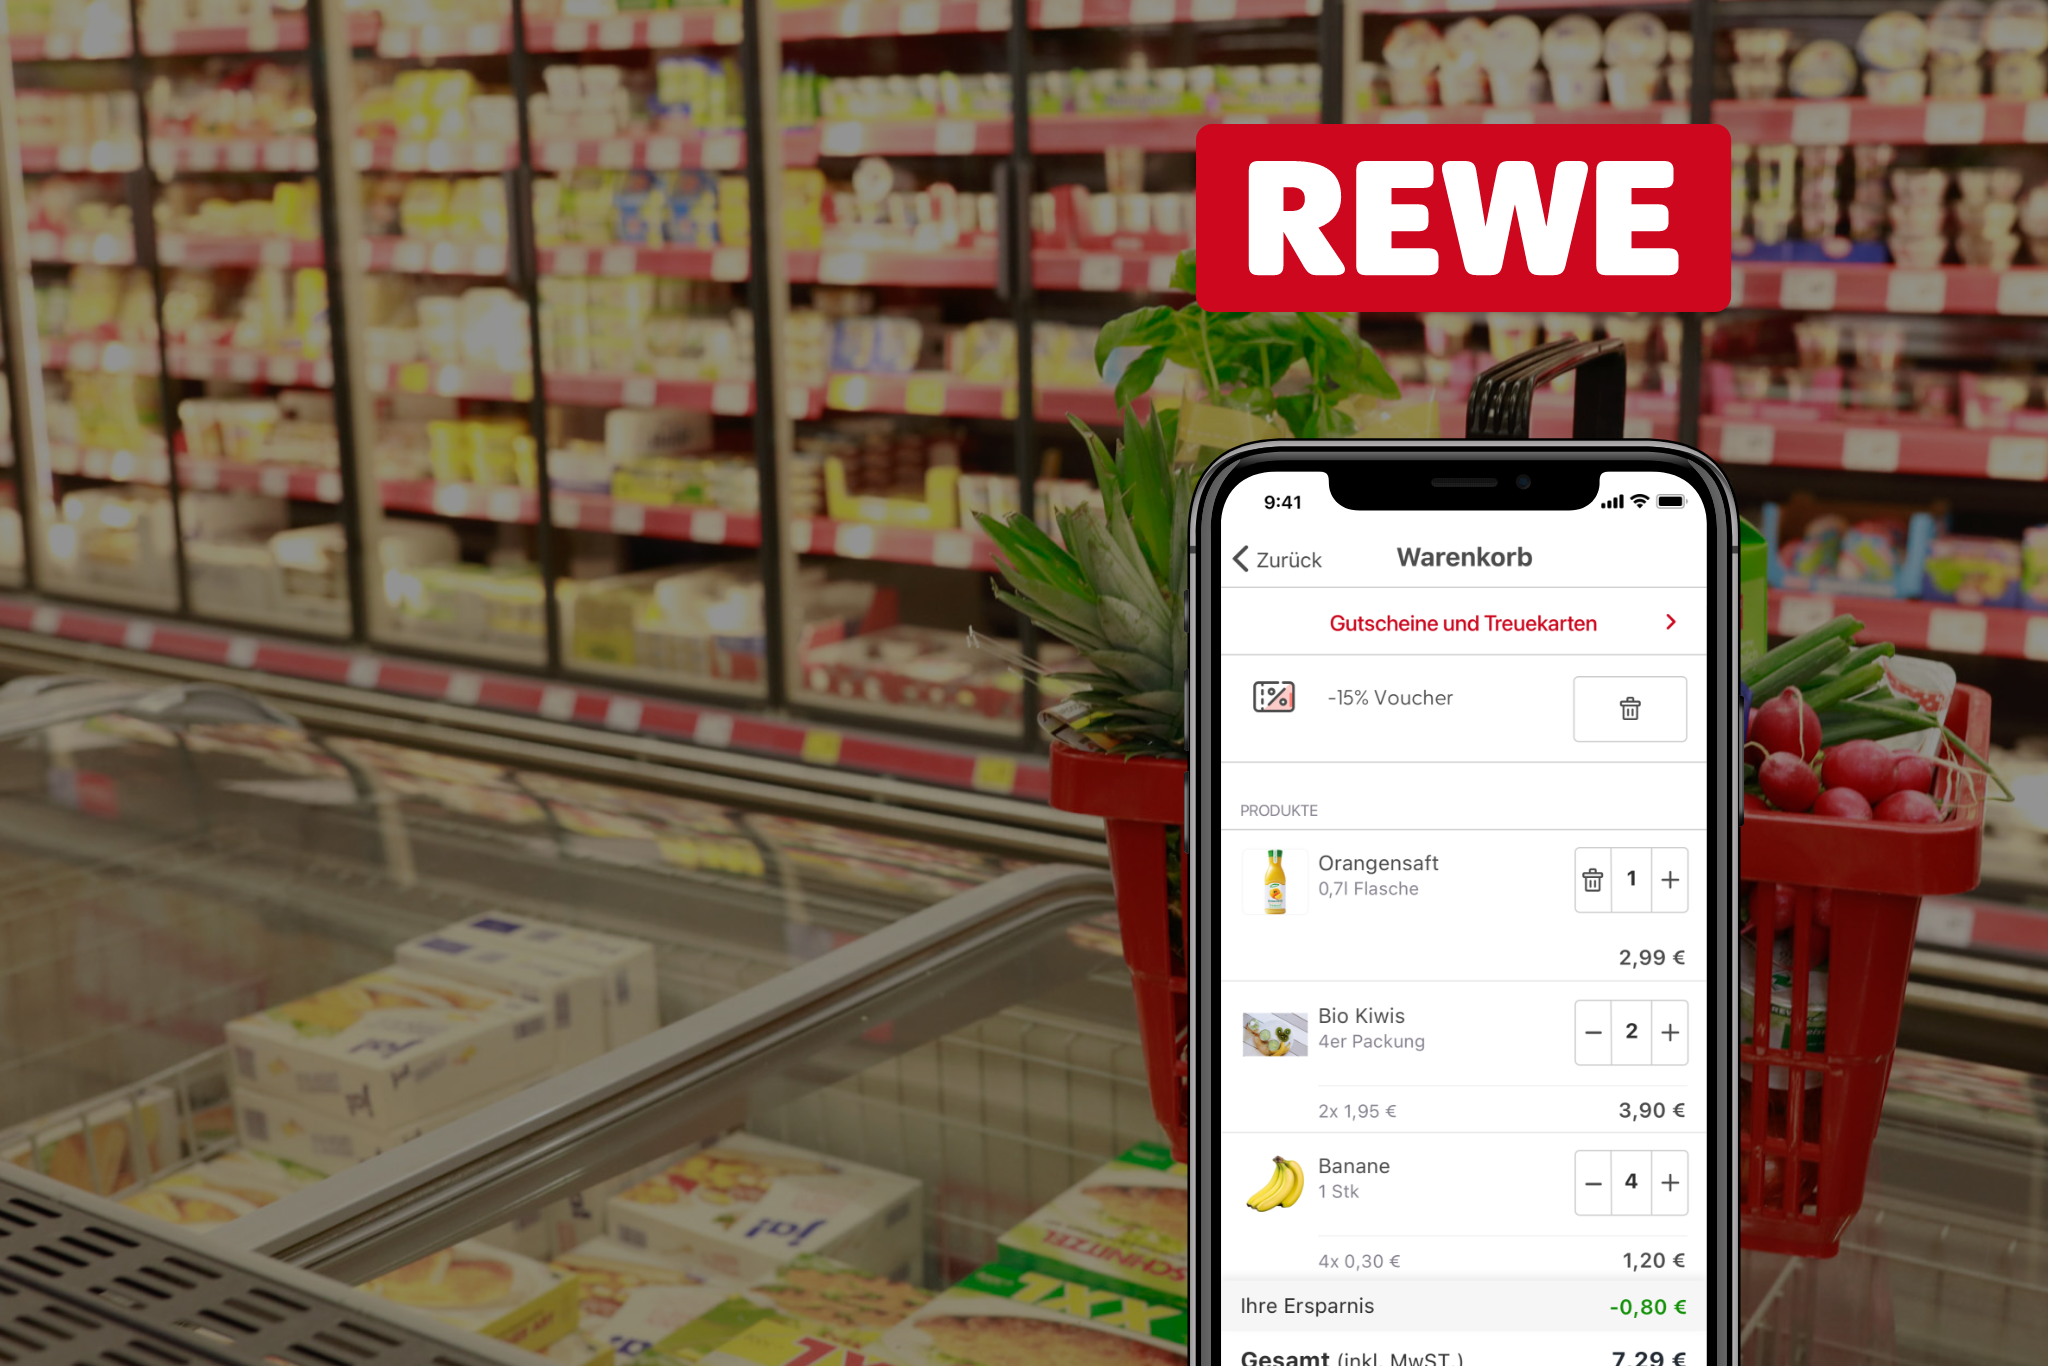 REWE Scan & Go Is Now Powered by shopreme